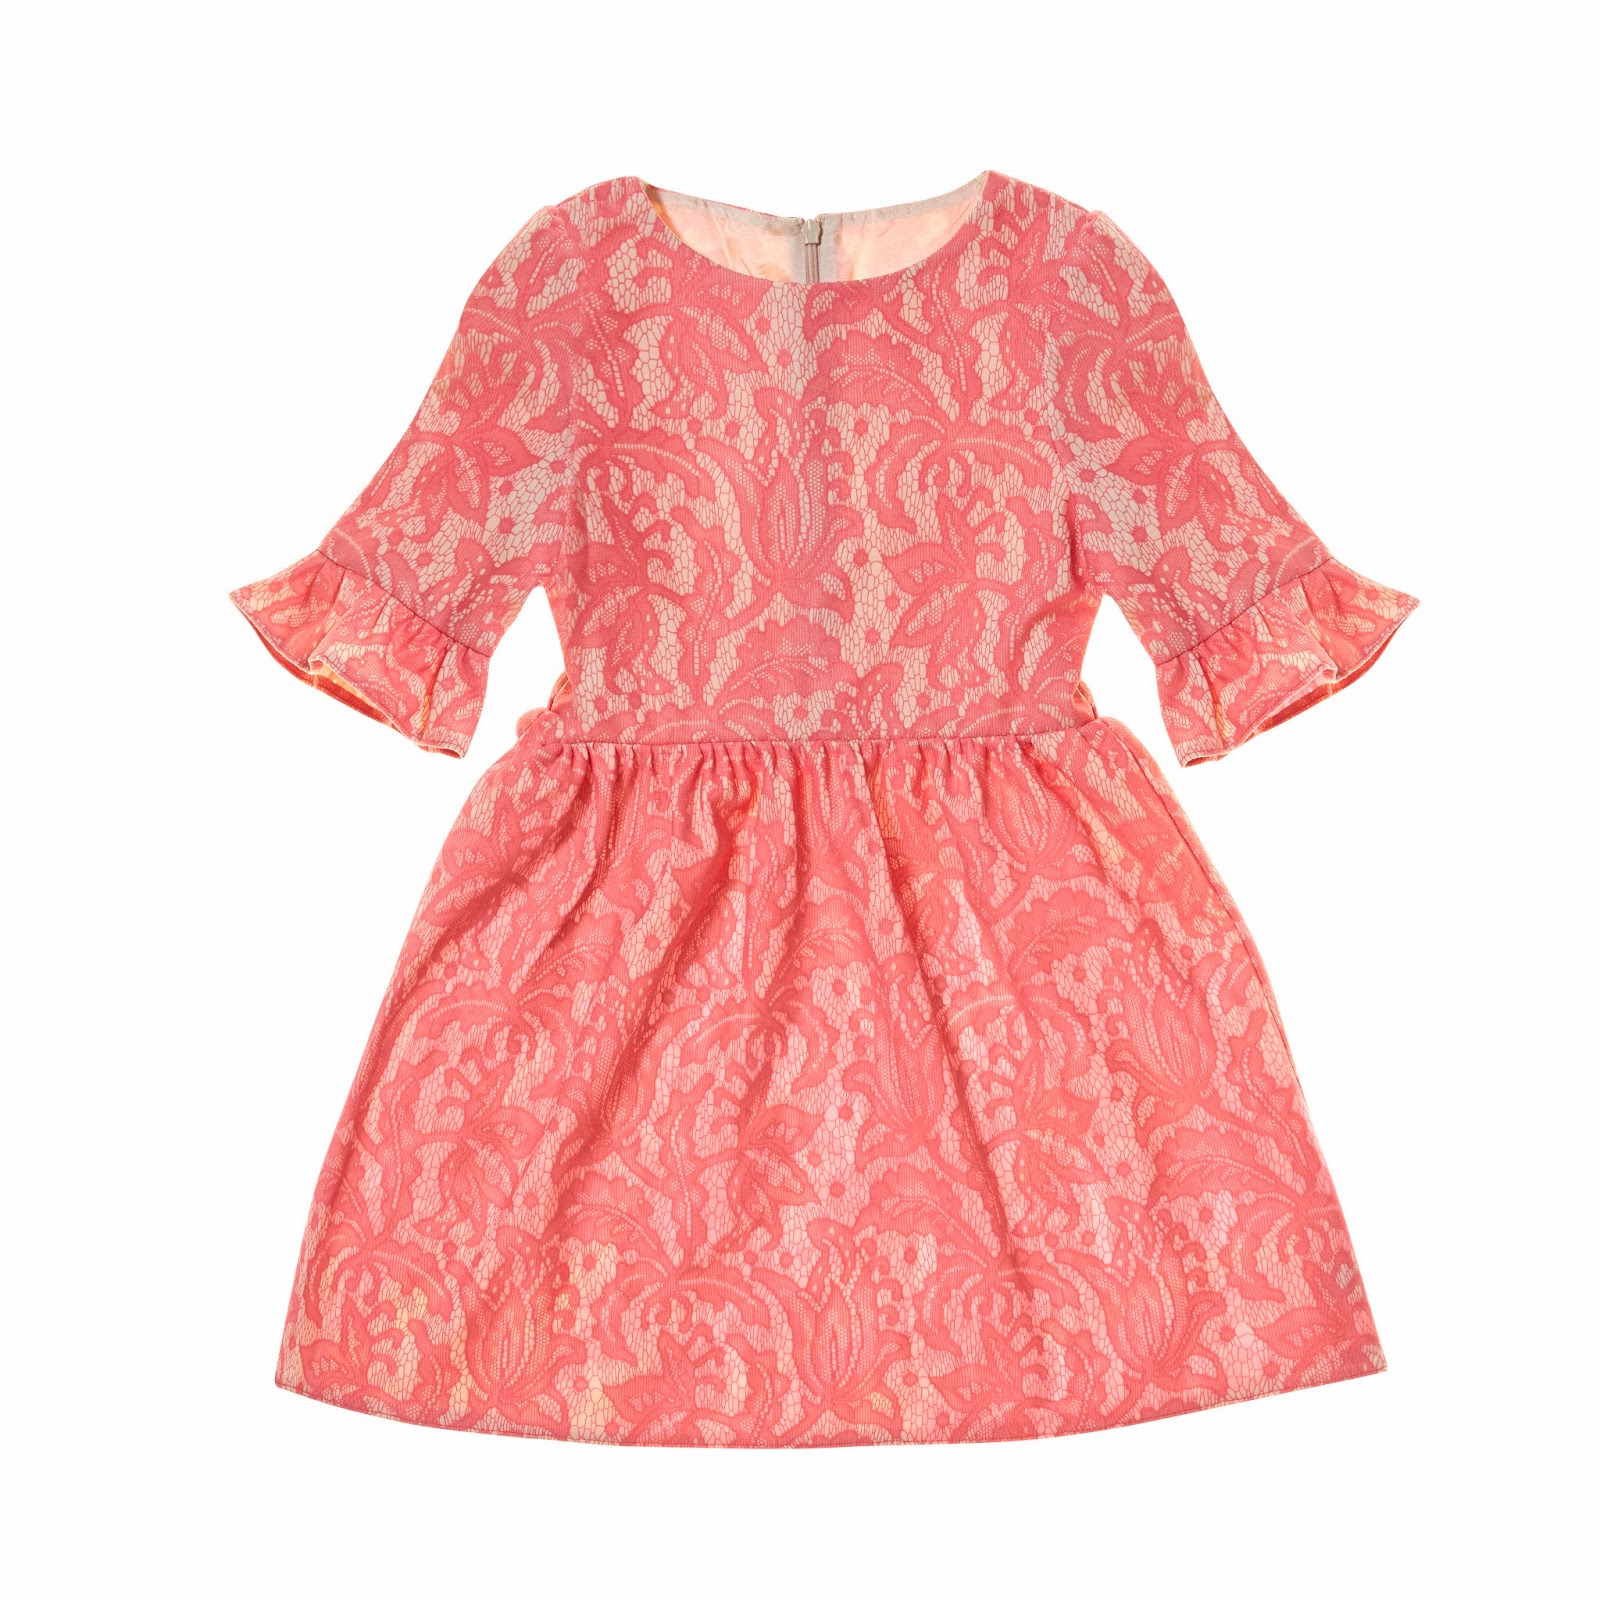 CLB ♥ Somerset girl by Alice Temperley | CHIC LITTLE BABY